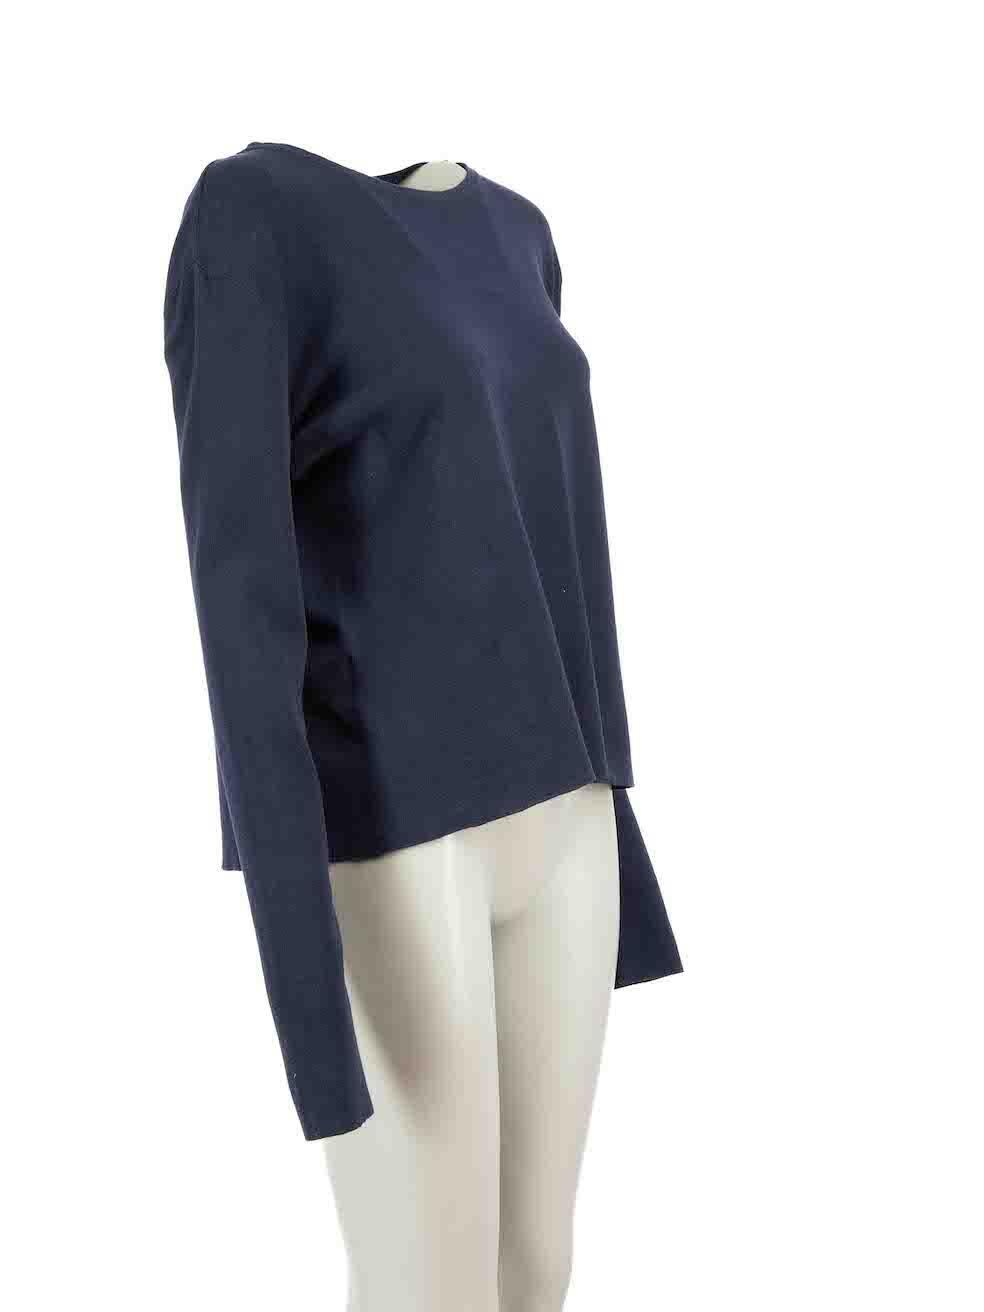 CONDITION is Very good. Minimal wear to knitwear is evident. Minimal wear to fabric finishing with very small discoloured mark at front on this used Marni designer resale item.

Details
Navy
Cotton
Long sleeves jumper
Stretchy
Round